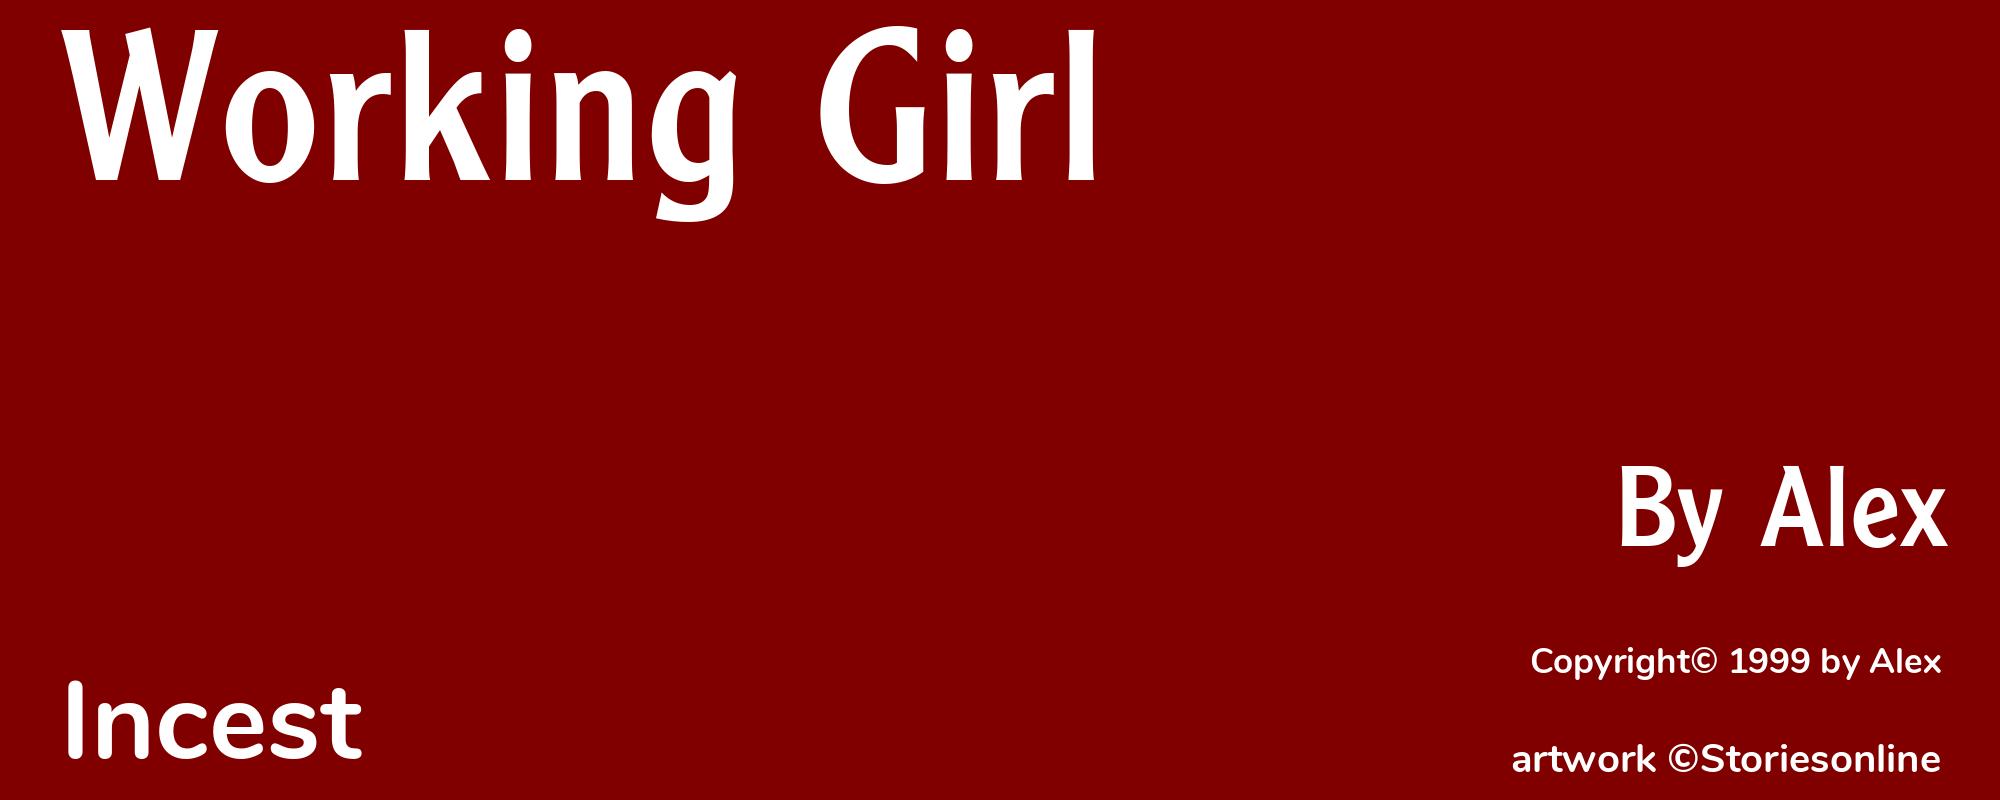 Working Girl - Cover